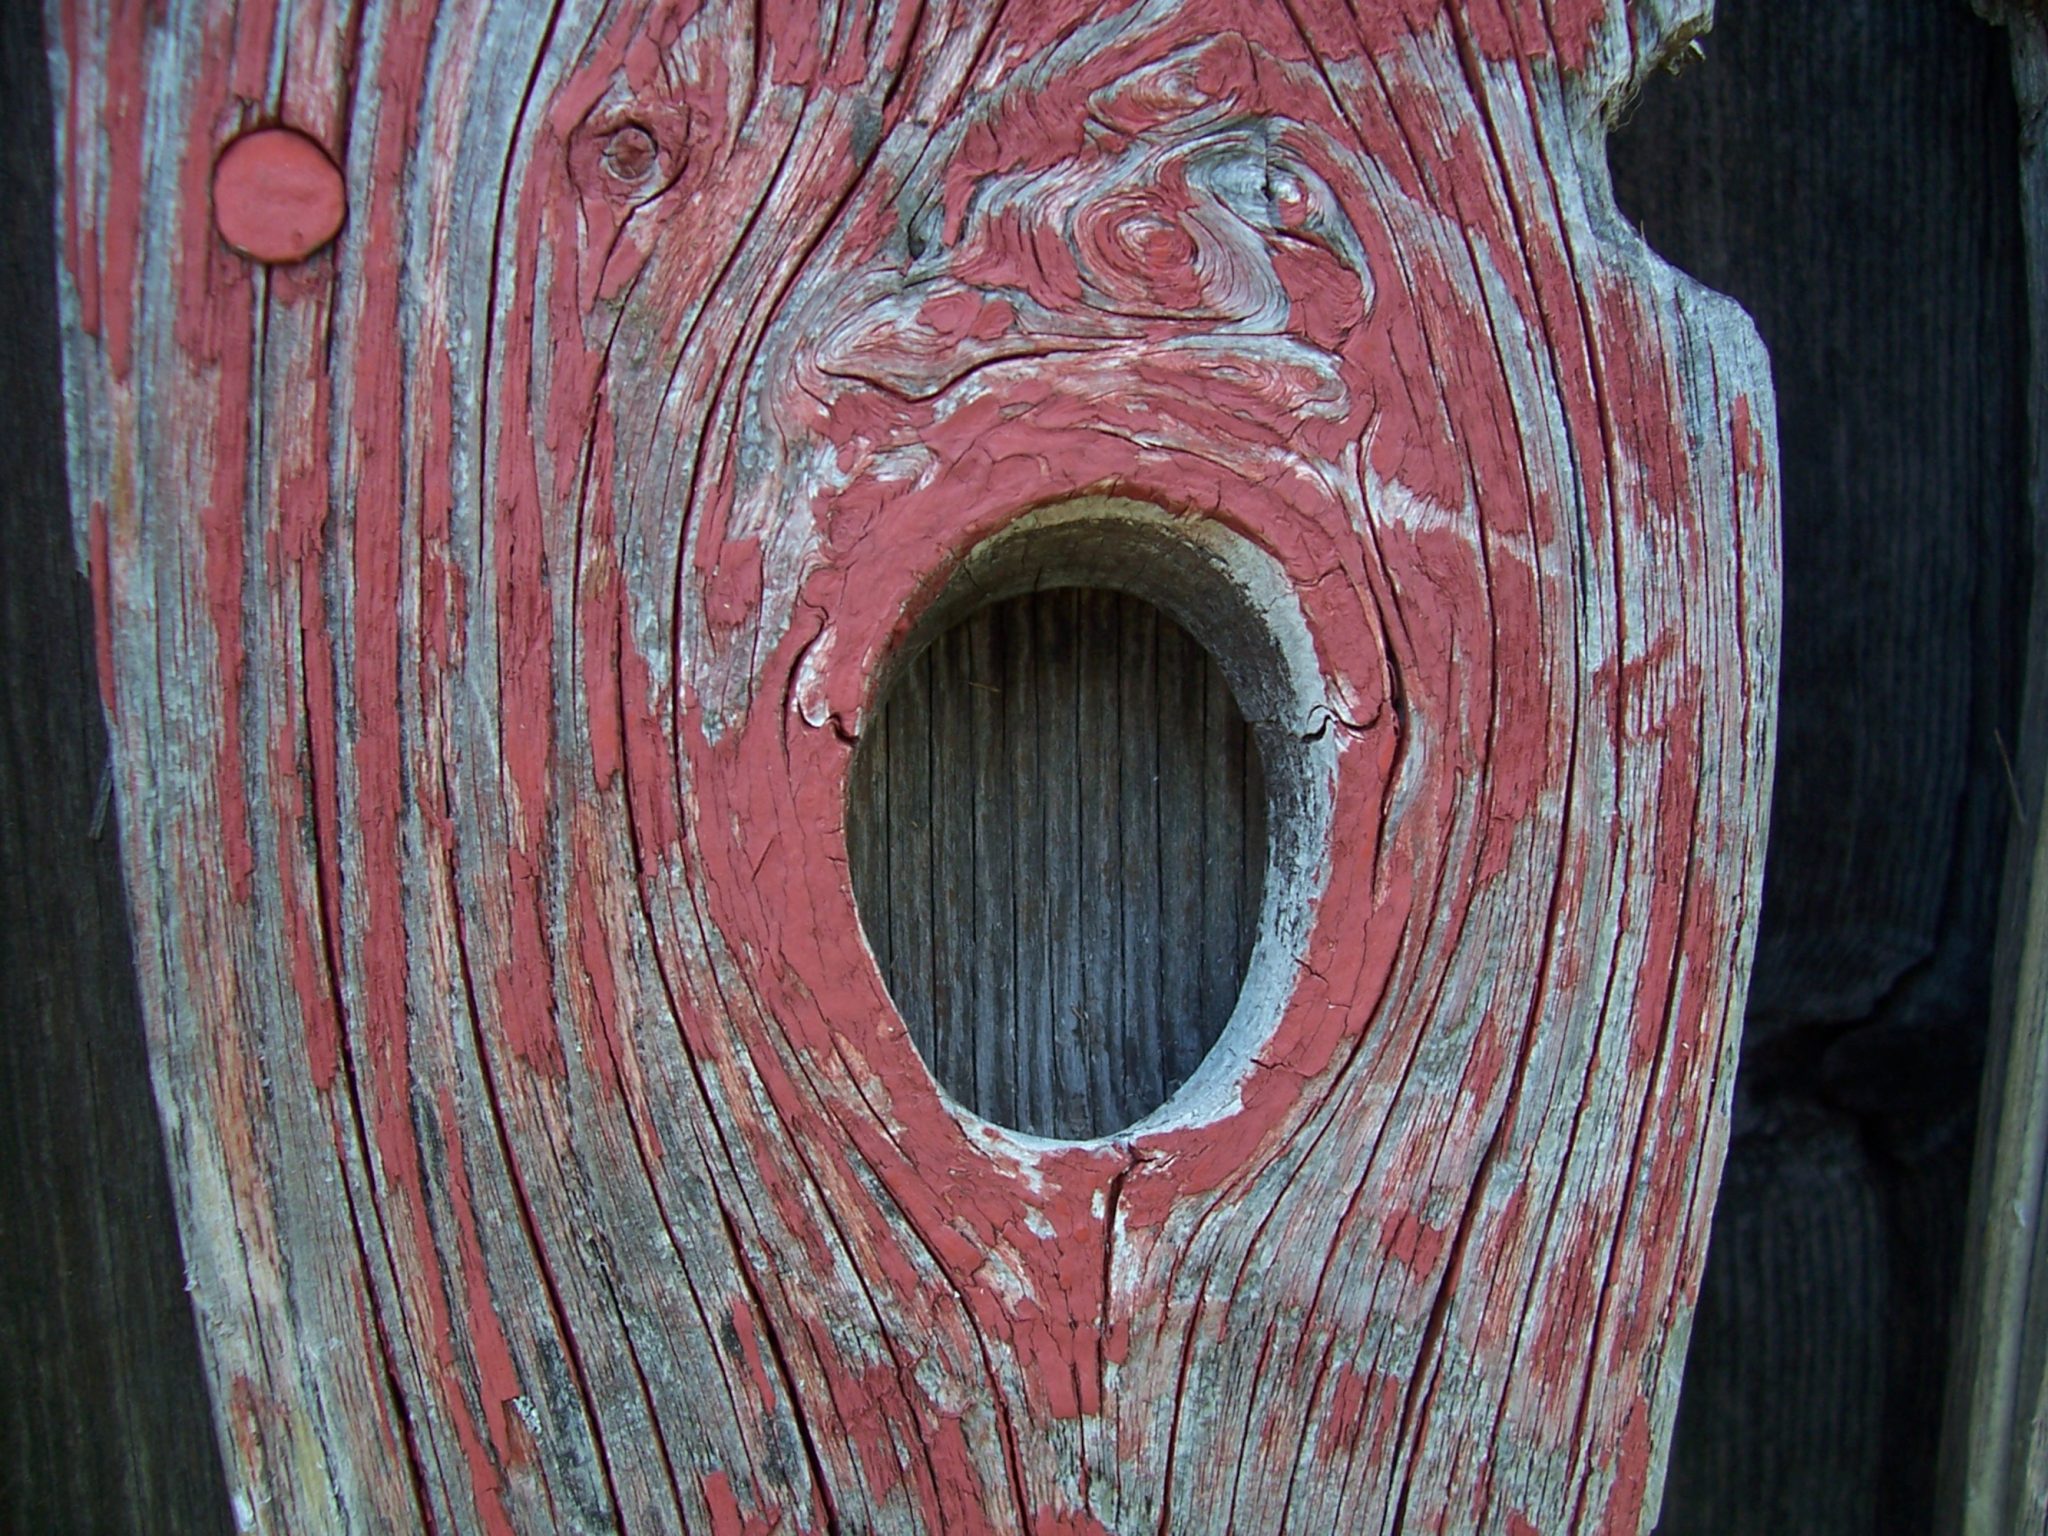 Knot hole in board that looks like a face